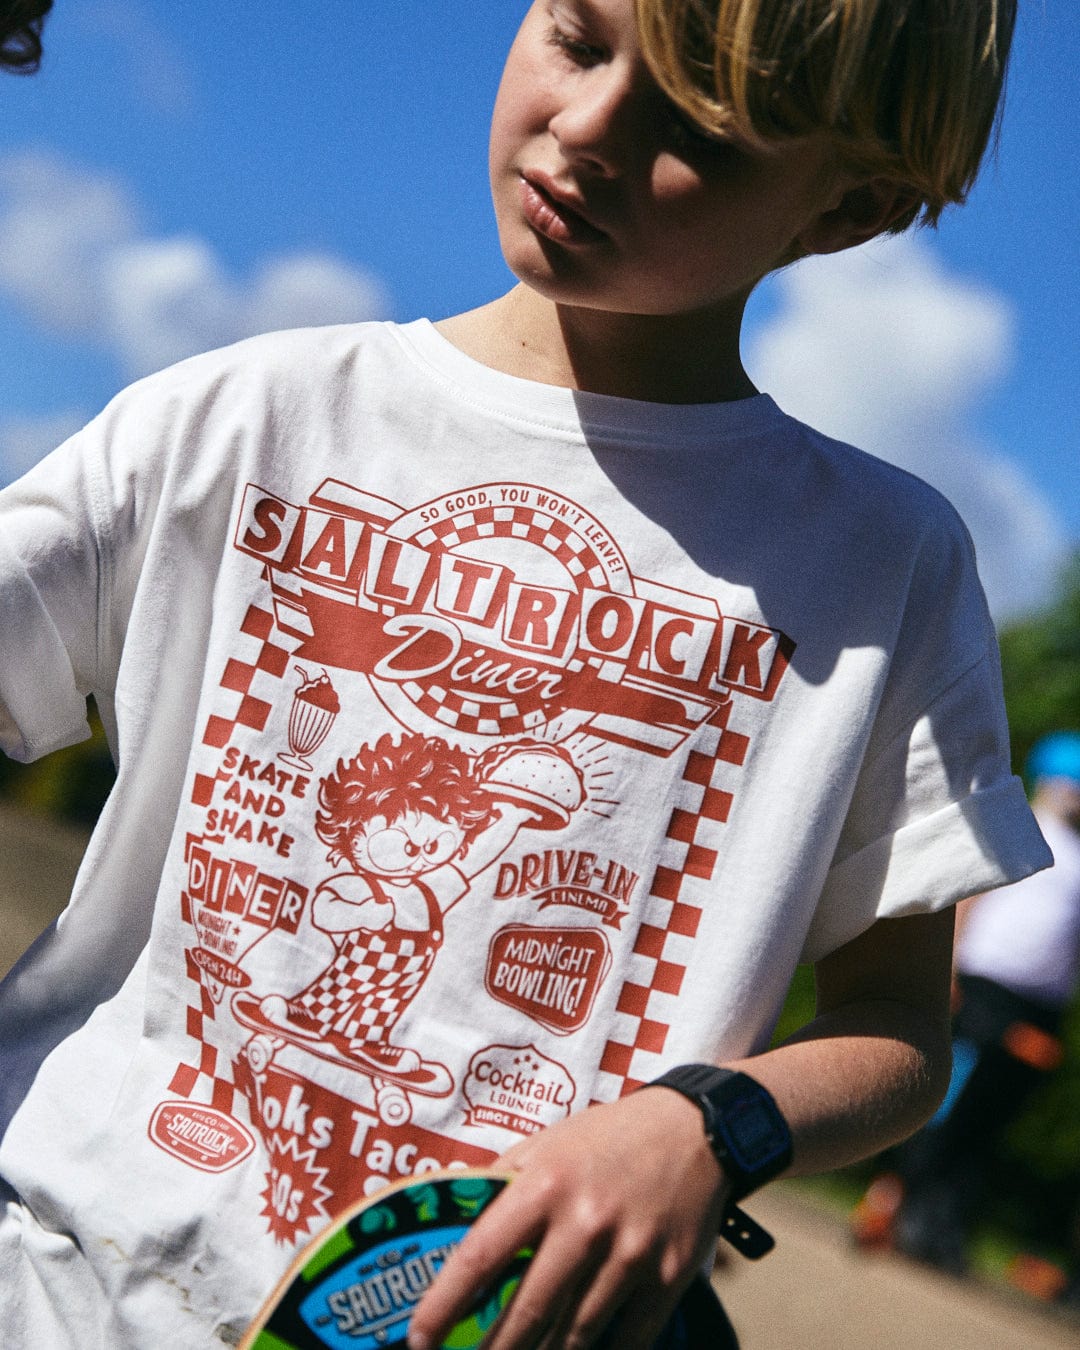 A young child wearing a white "Taco Tok - Kids Short Sleeve T-Shirt" by Saltrock, made of 100% Cotton, is holding a skateboard. The t-shirt features a retro-style design with various diner-themed illustrations and text.